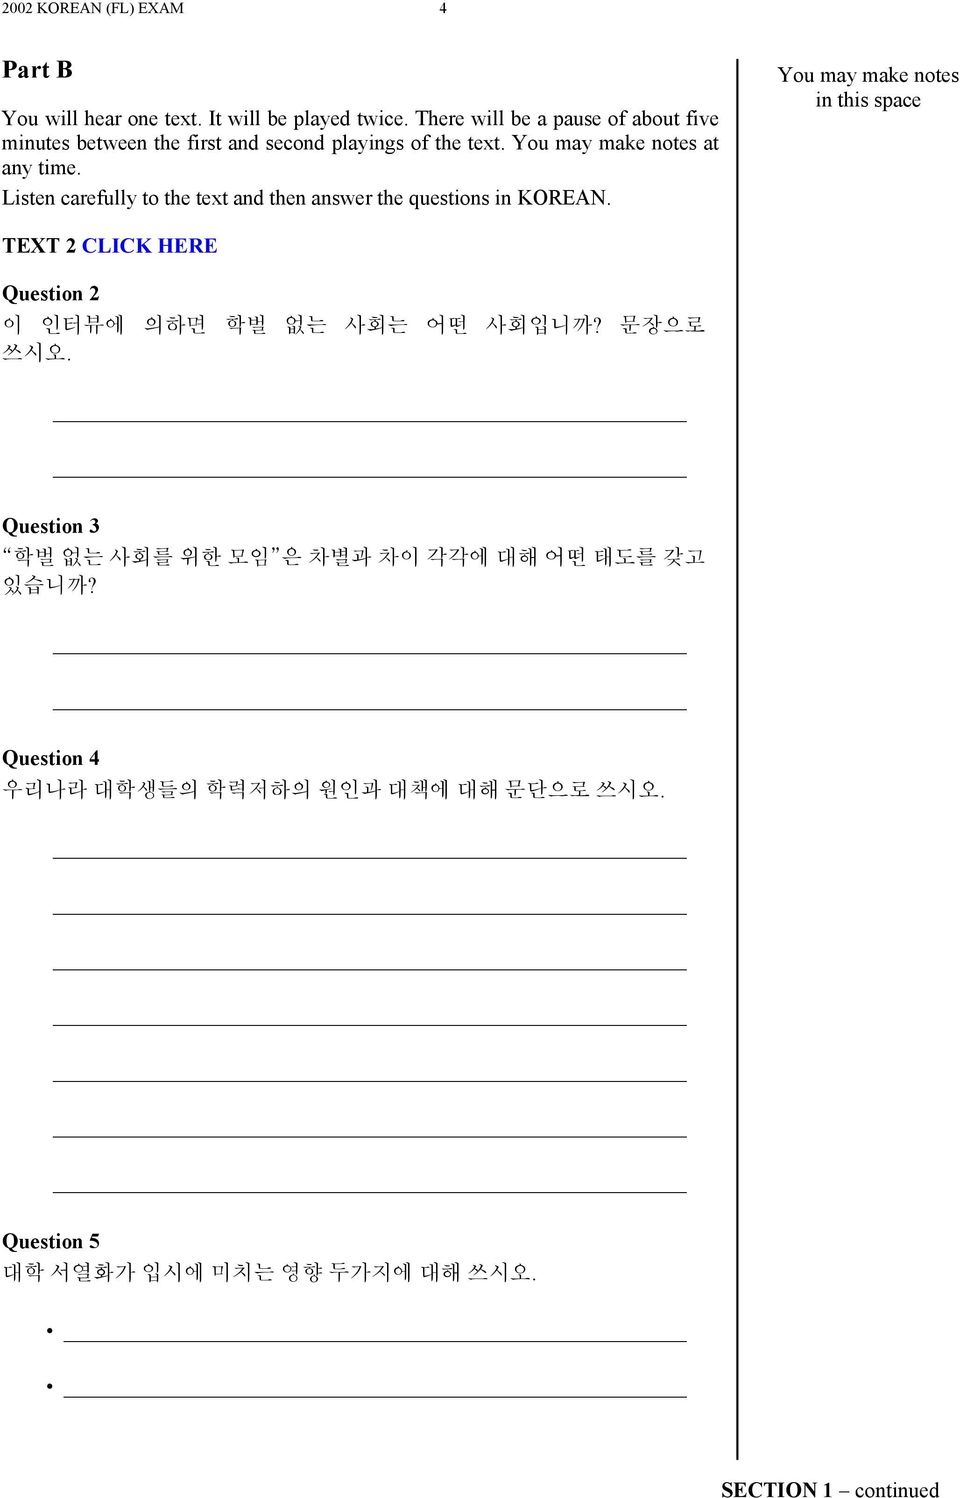 Listen carefully to the text and then answer the questions in KOREAN.